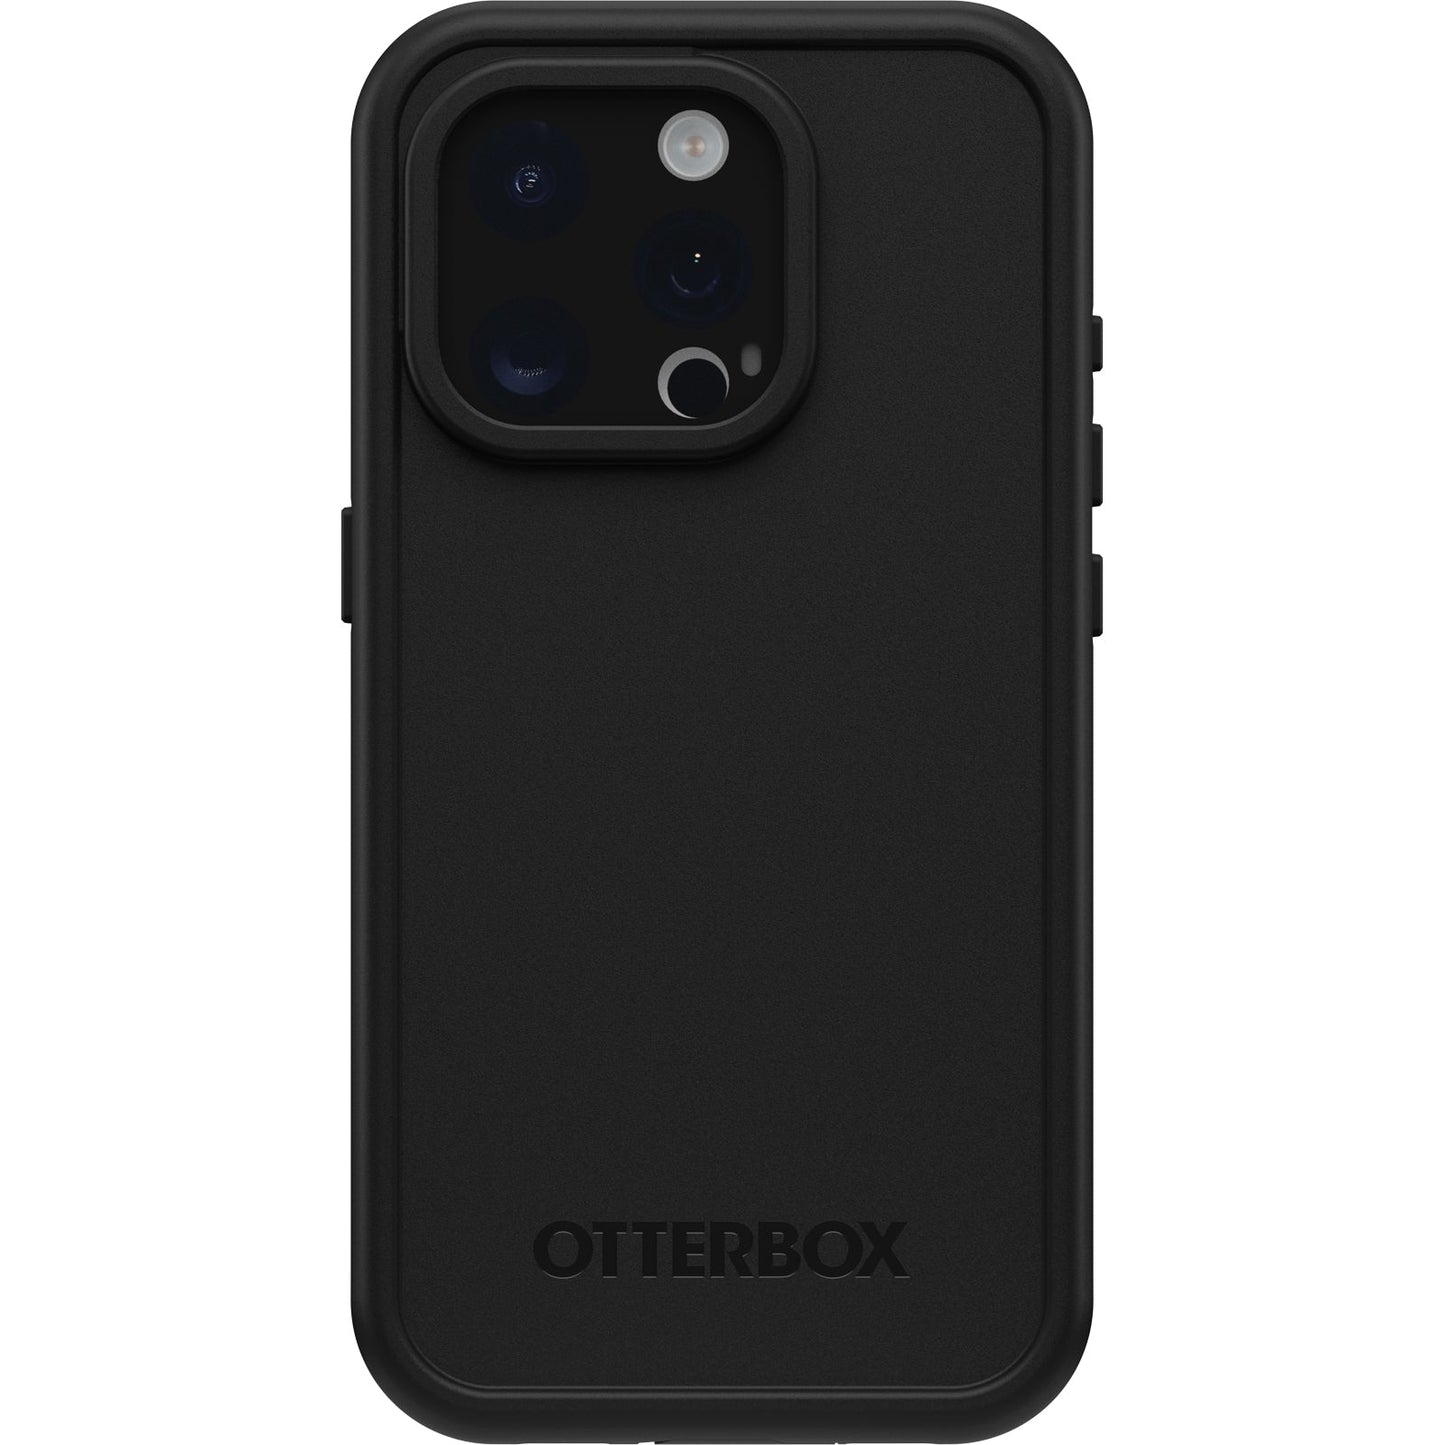 OtterBox Fre Case for iPhone 15 Pro for MagSafe, Waterproof (IP68), Shockproof, Dirtproof, Sleek and Slim Protective Case with Built in Screen Protector, x5 Tested to Military Standard, Black